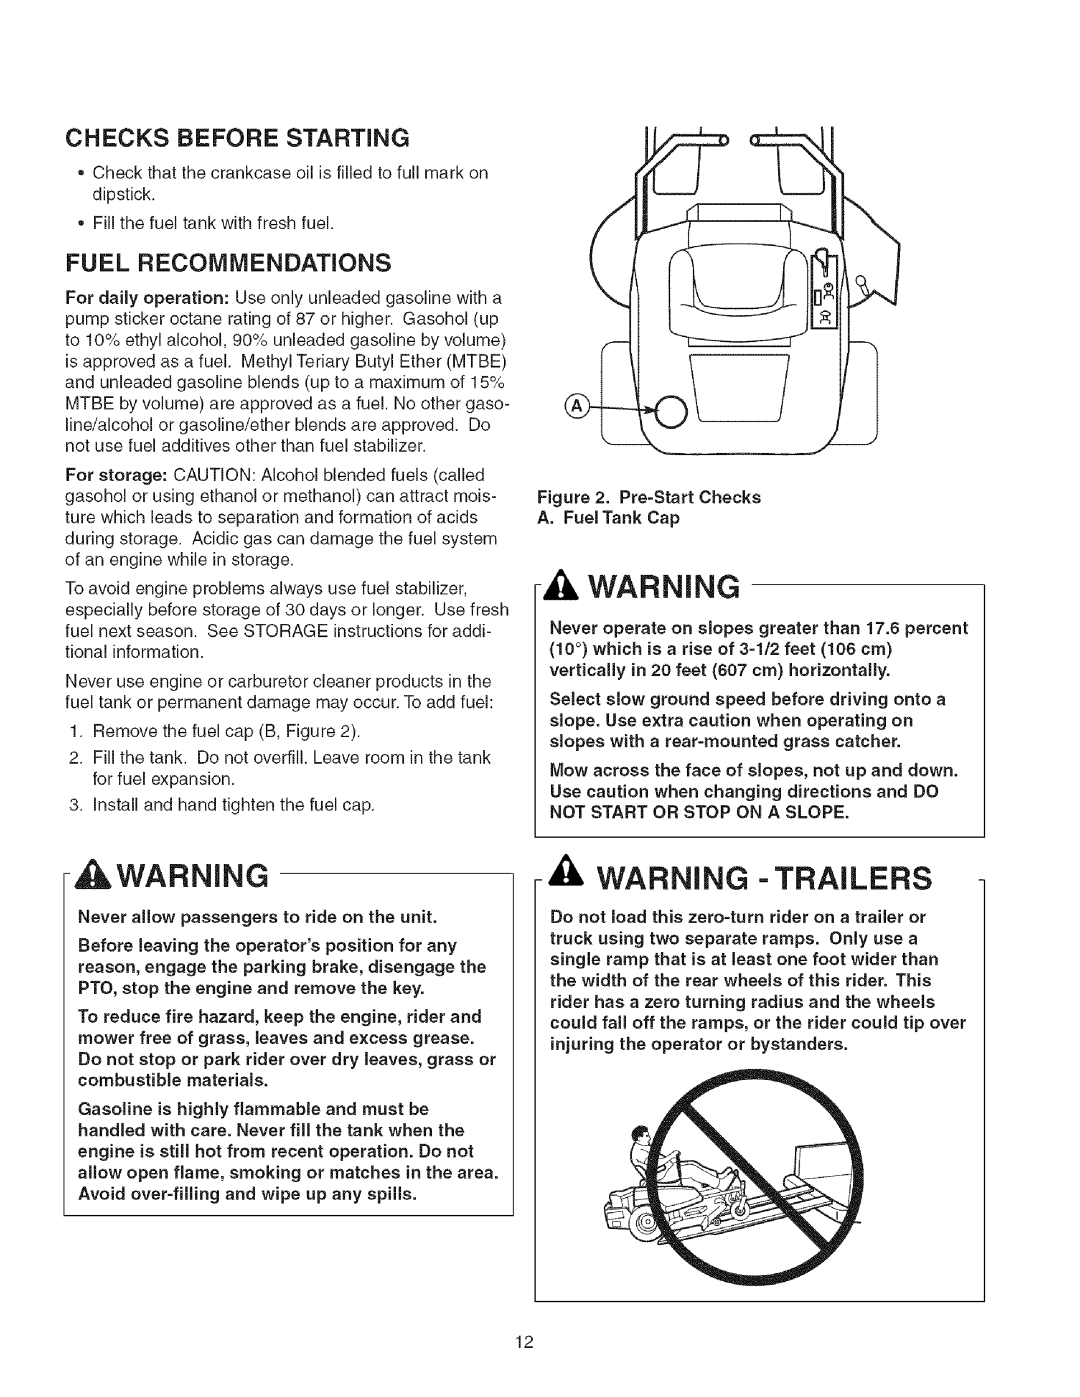 Craftsman 107.27768 manual Warning - Trailers, Checks Before Starting, Fuel Recommendations 